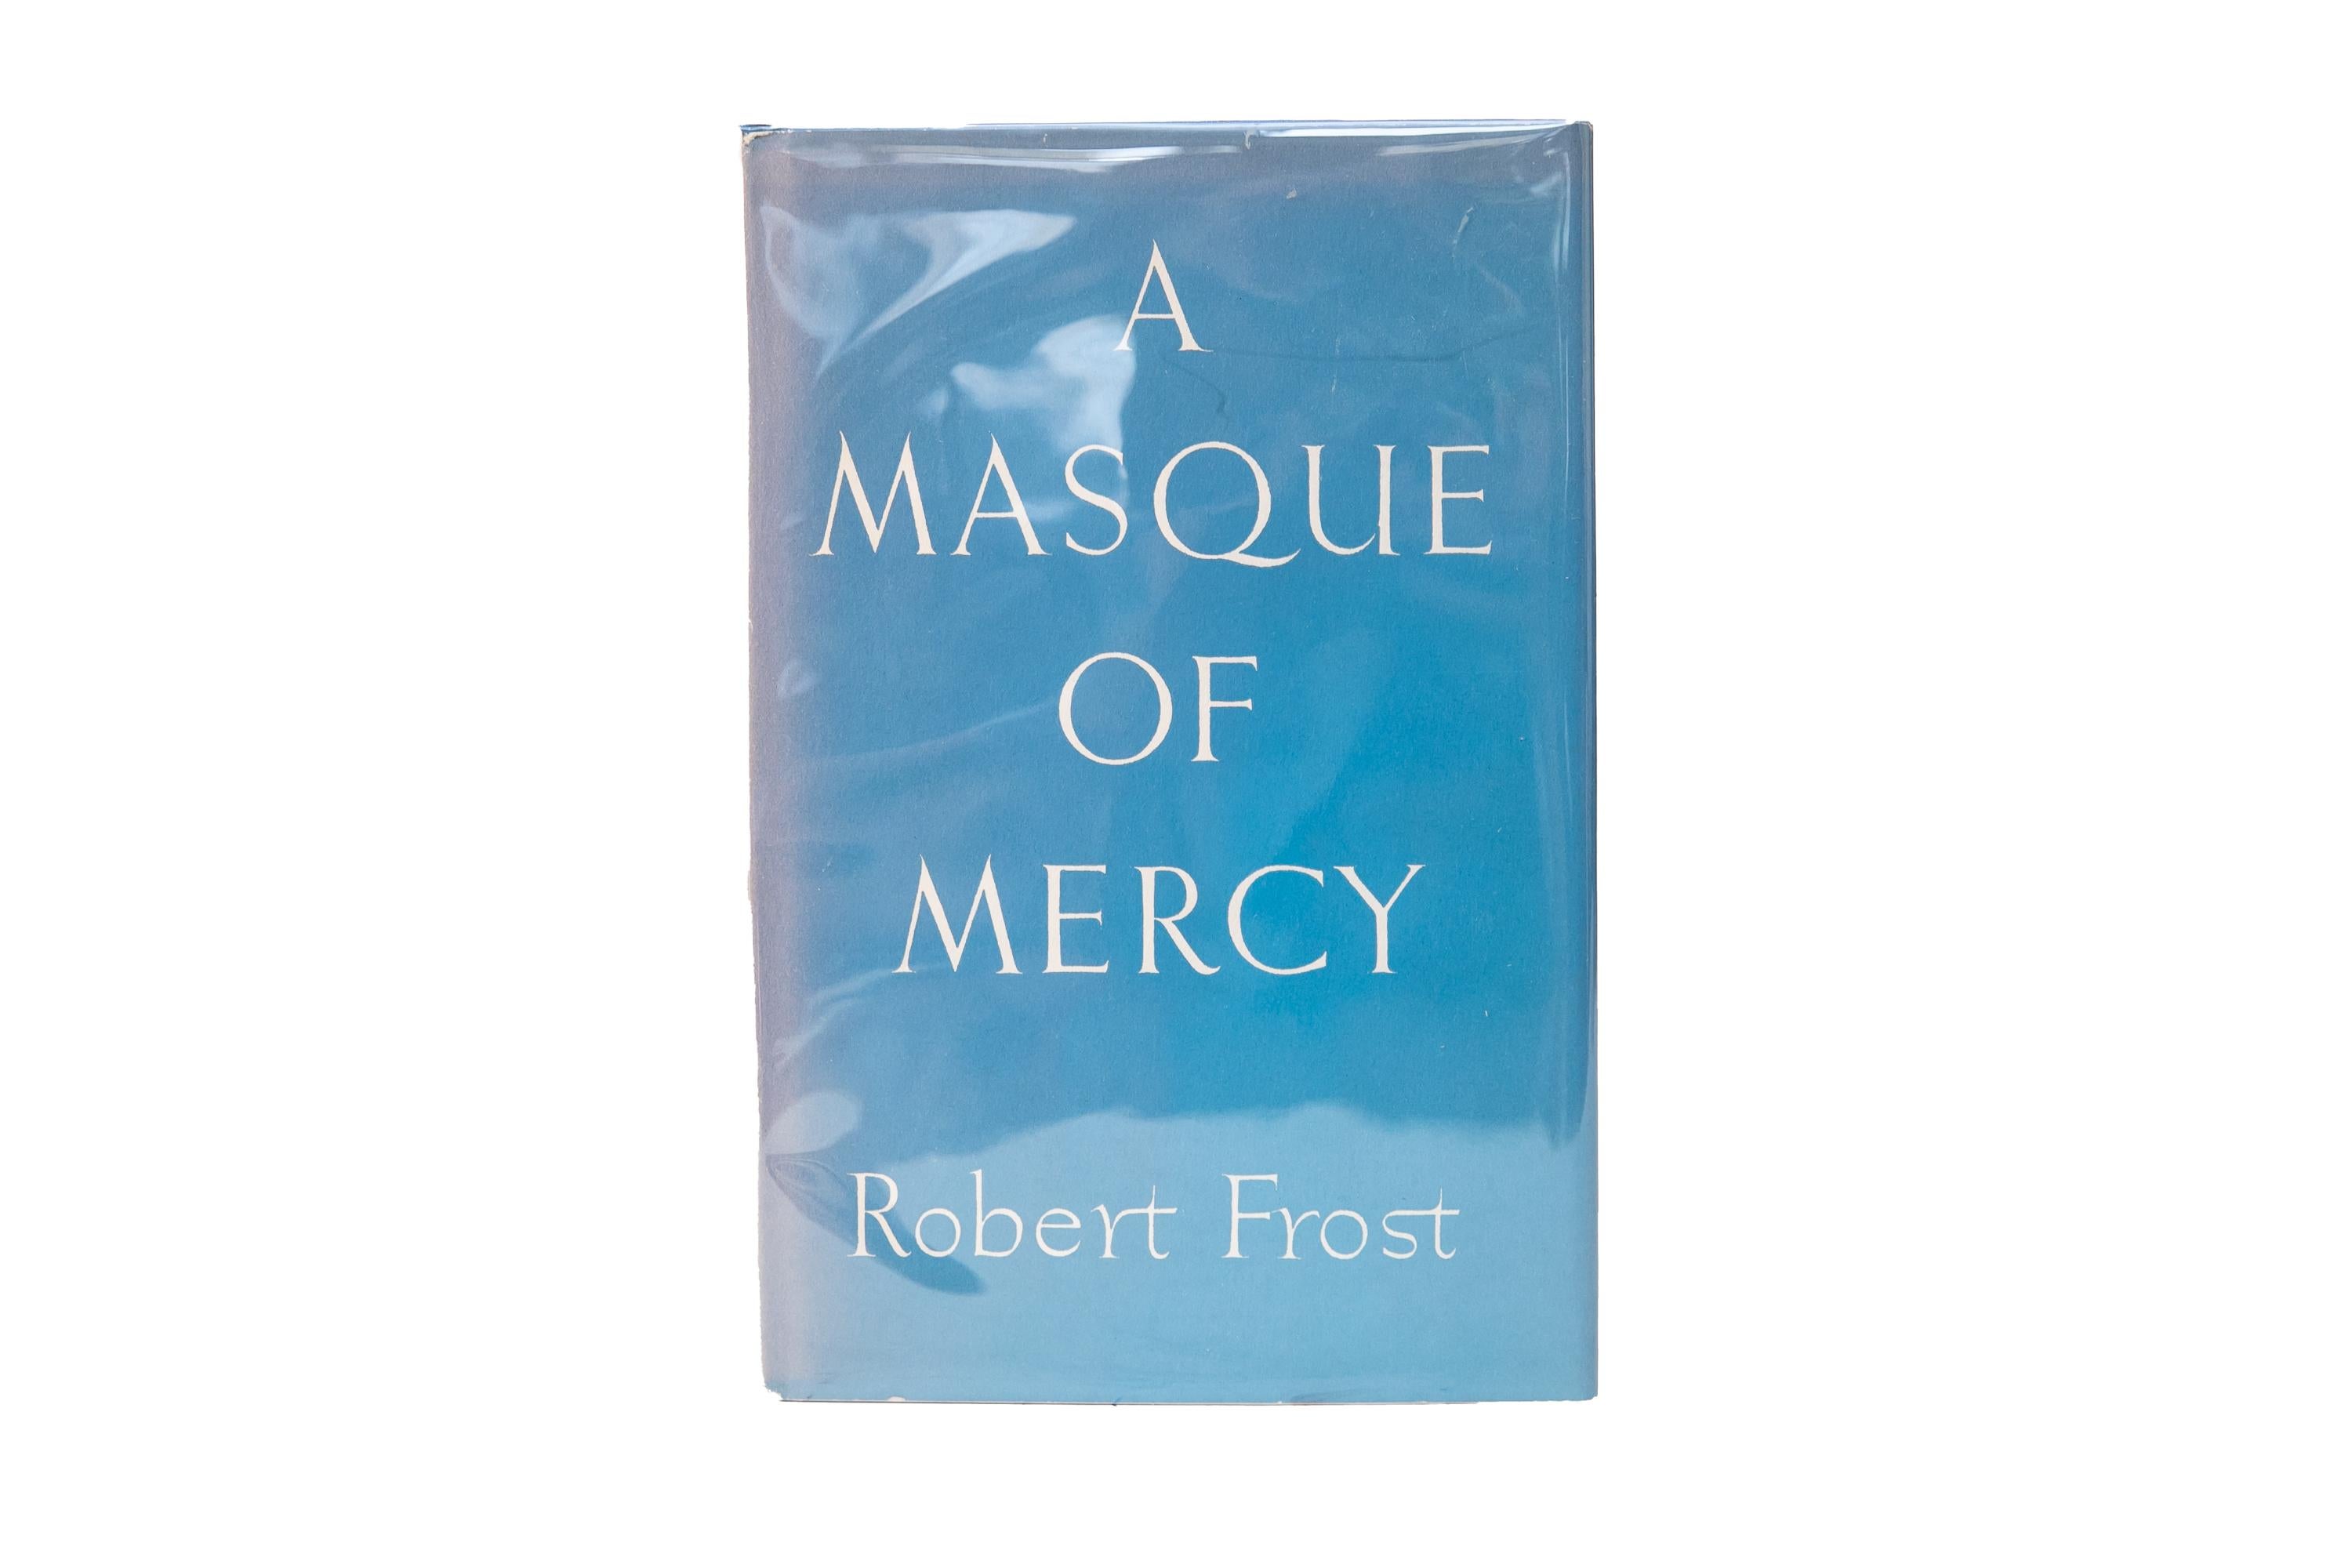 American 1 Volume. Robert Frost, A Masque of Mercy. For Sale